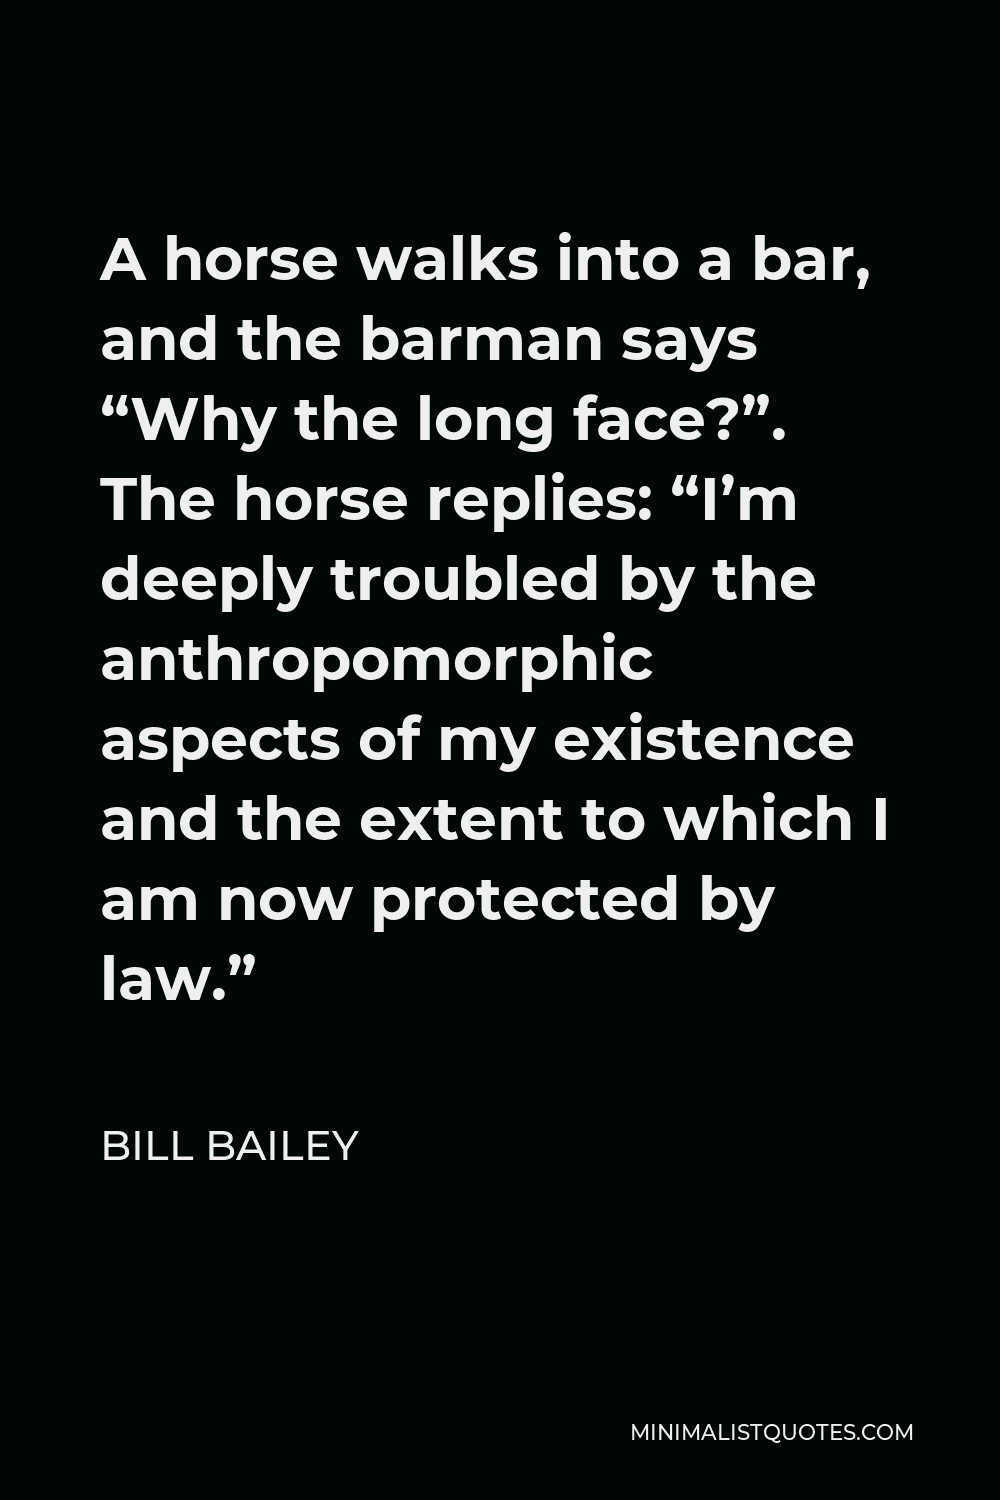 Bill Bailey Quote - A horse walks into a bar, and the barman says “Why the long face?”. The horse replies: “I’m deeply troubled by the anthropomorphic aspects of my existence and the extent to which I am now protected by law.”